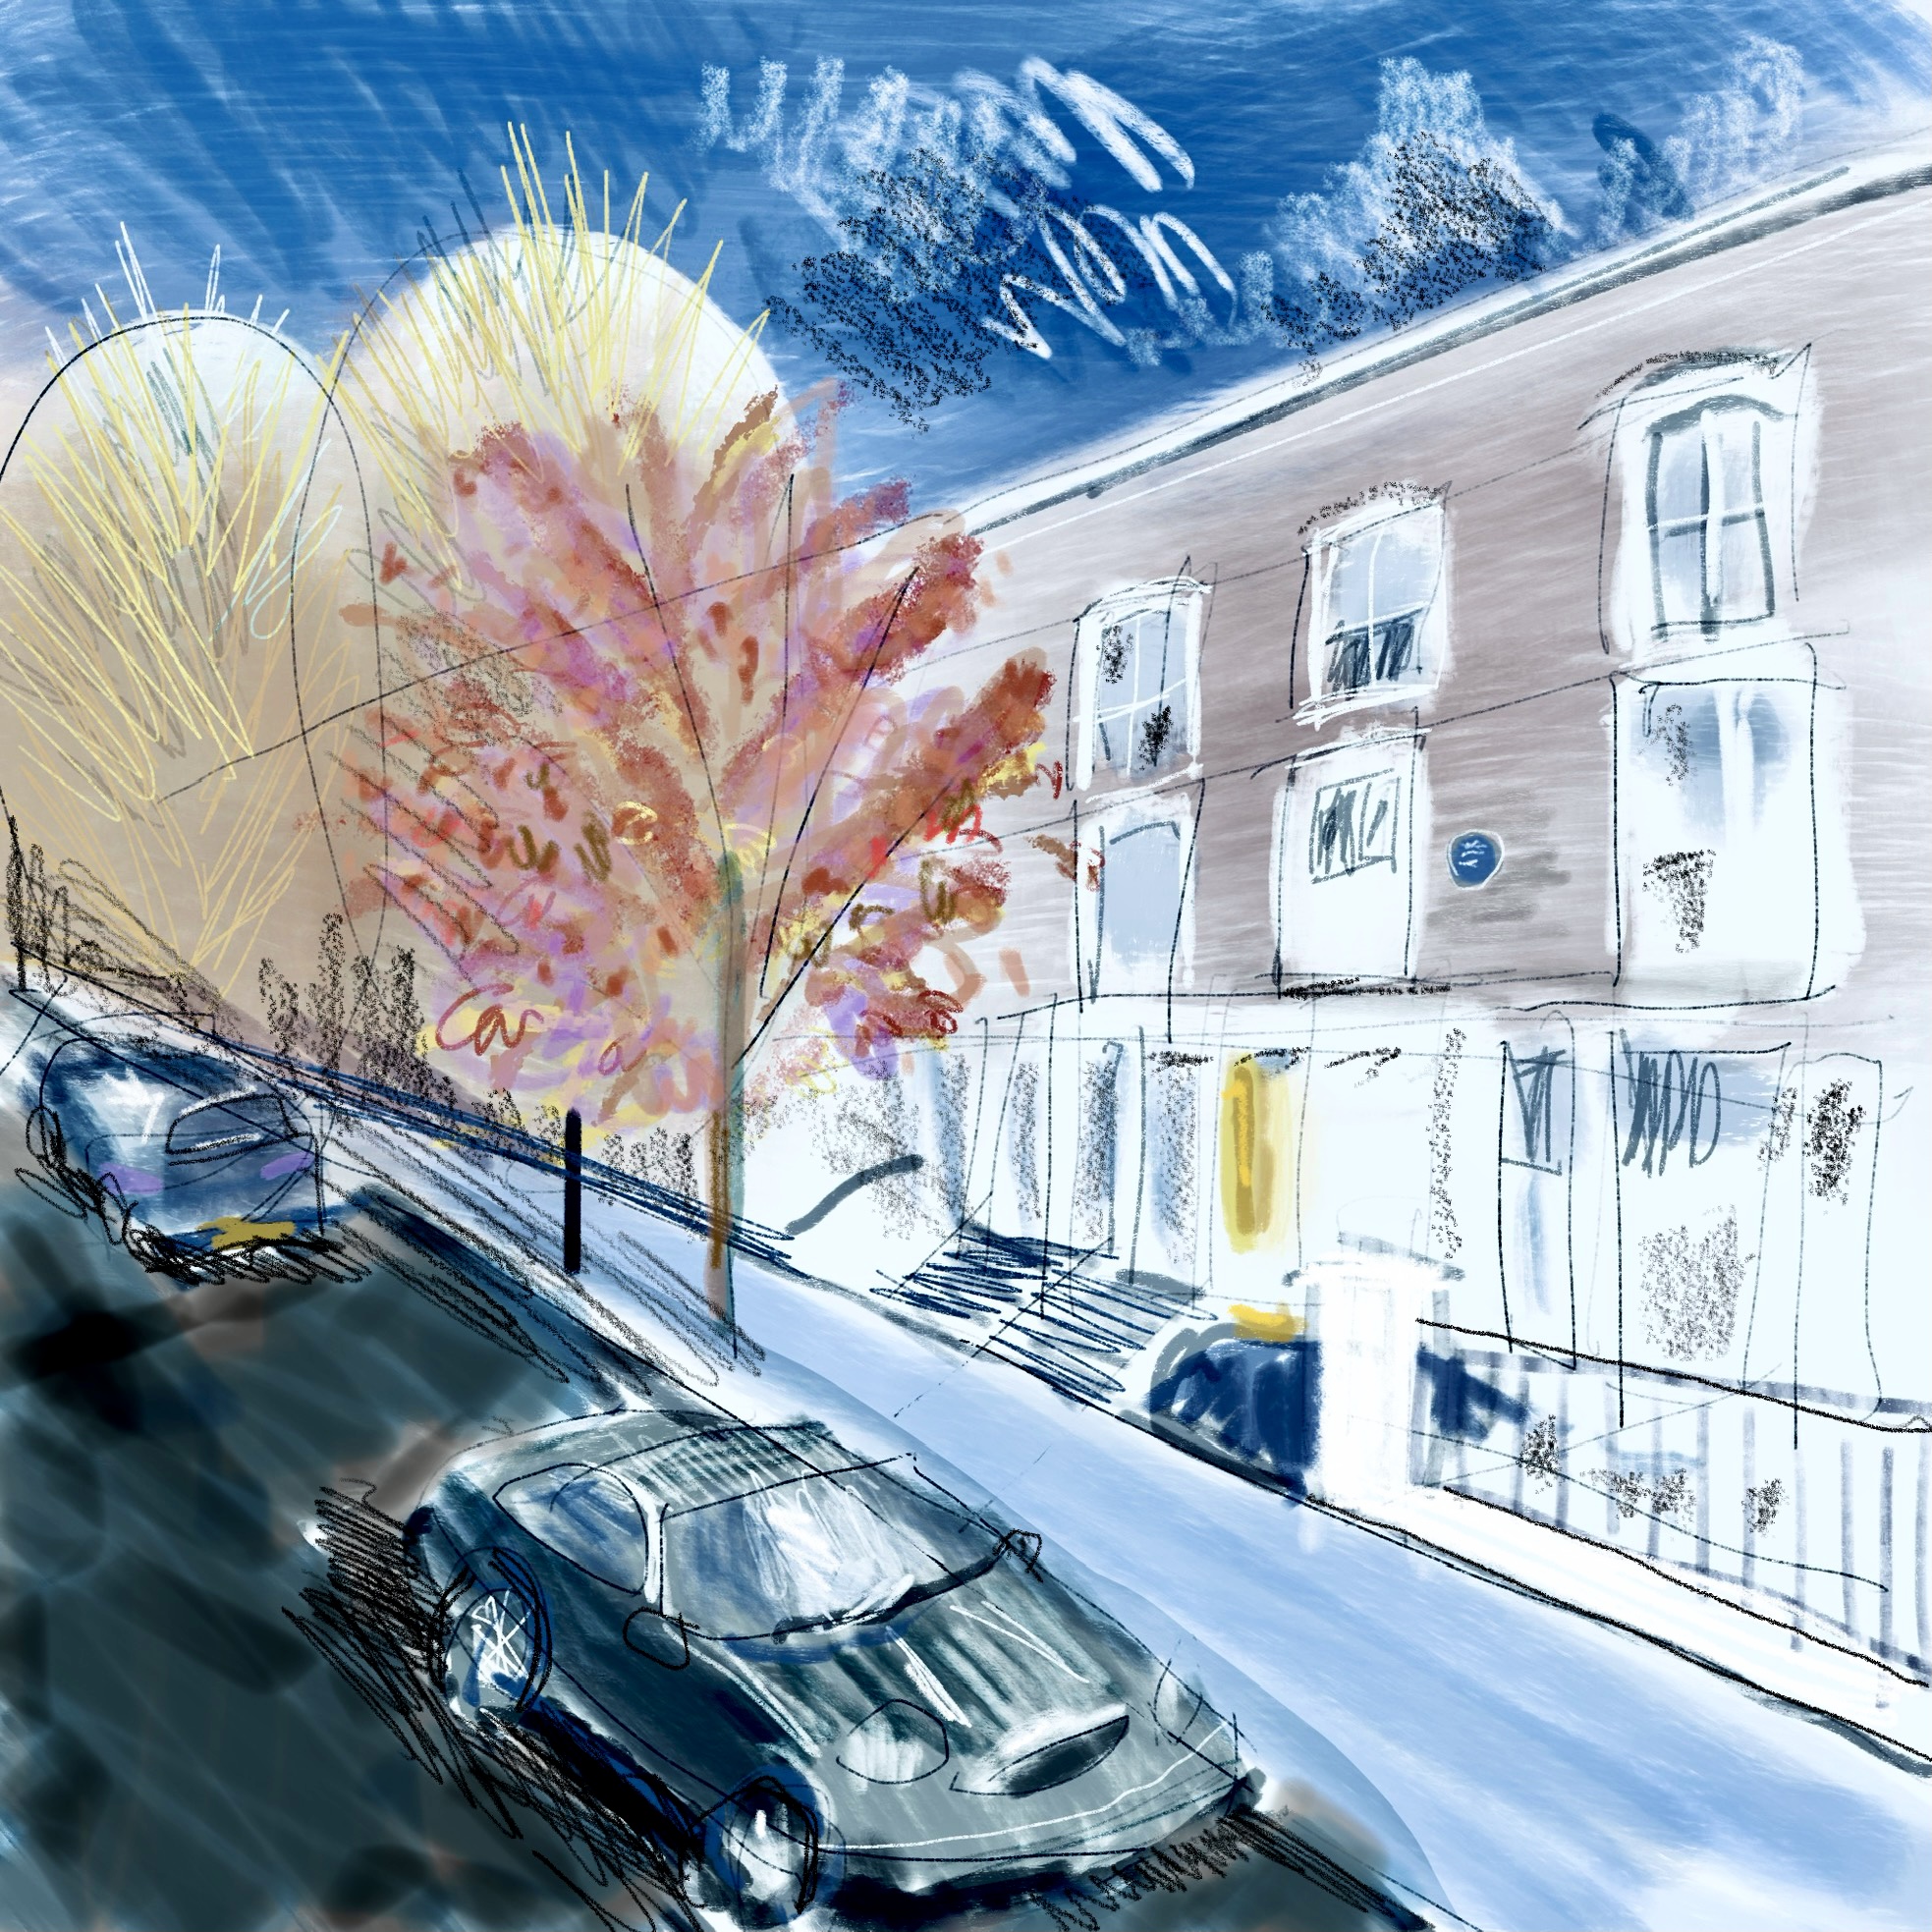 Illustrated autumn streetscape. Blue plaque on a terrace of houses. Cars in foreground. Harmony of blues, red-orange and black and white. Rapid energetic pen and brush strokes